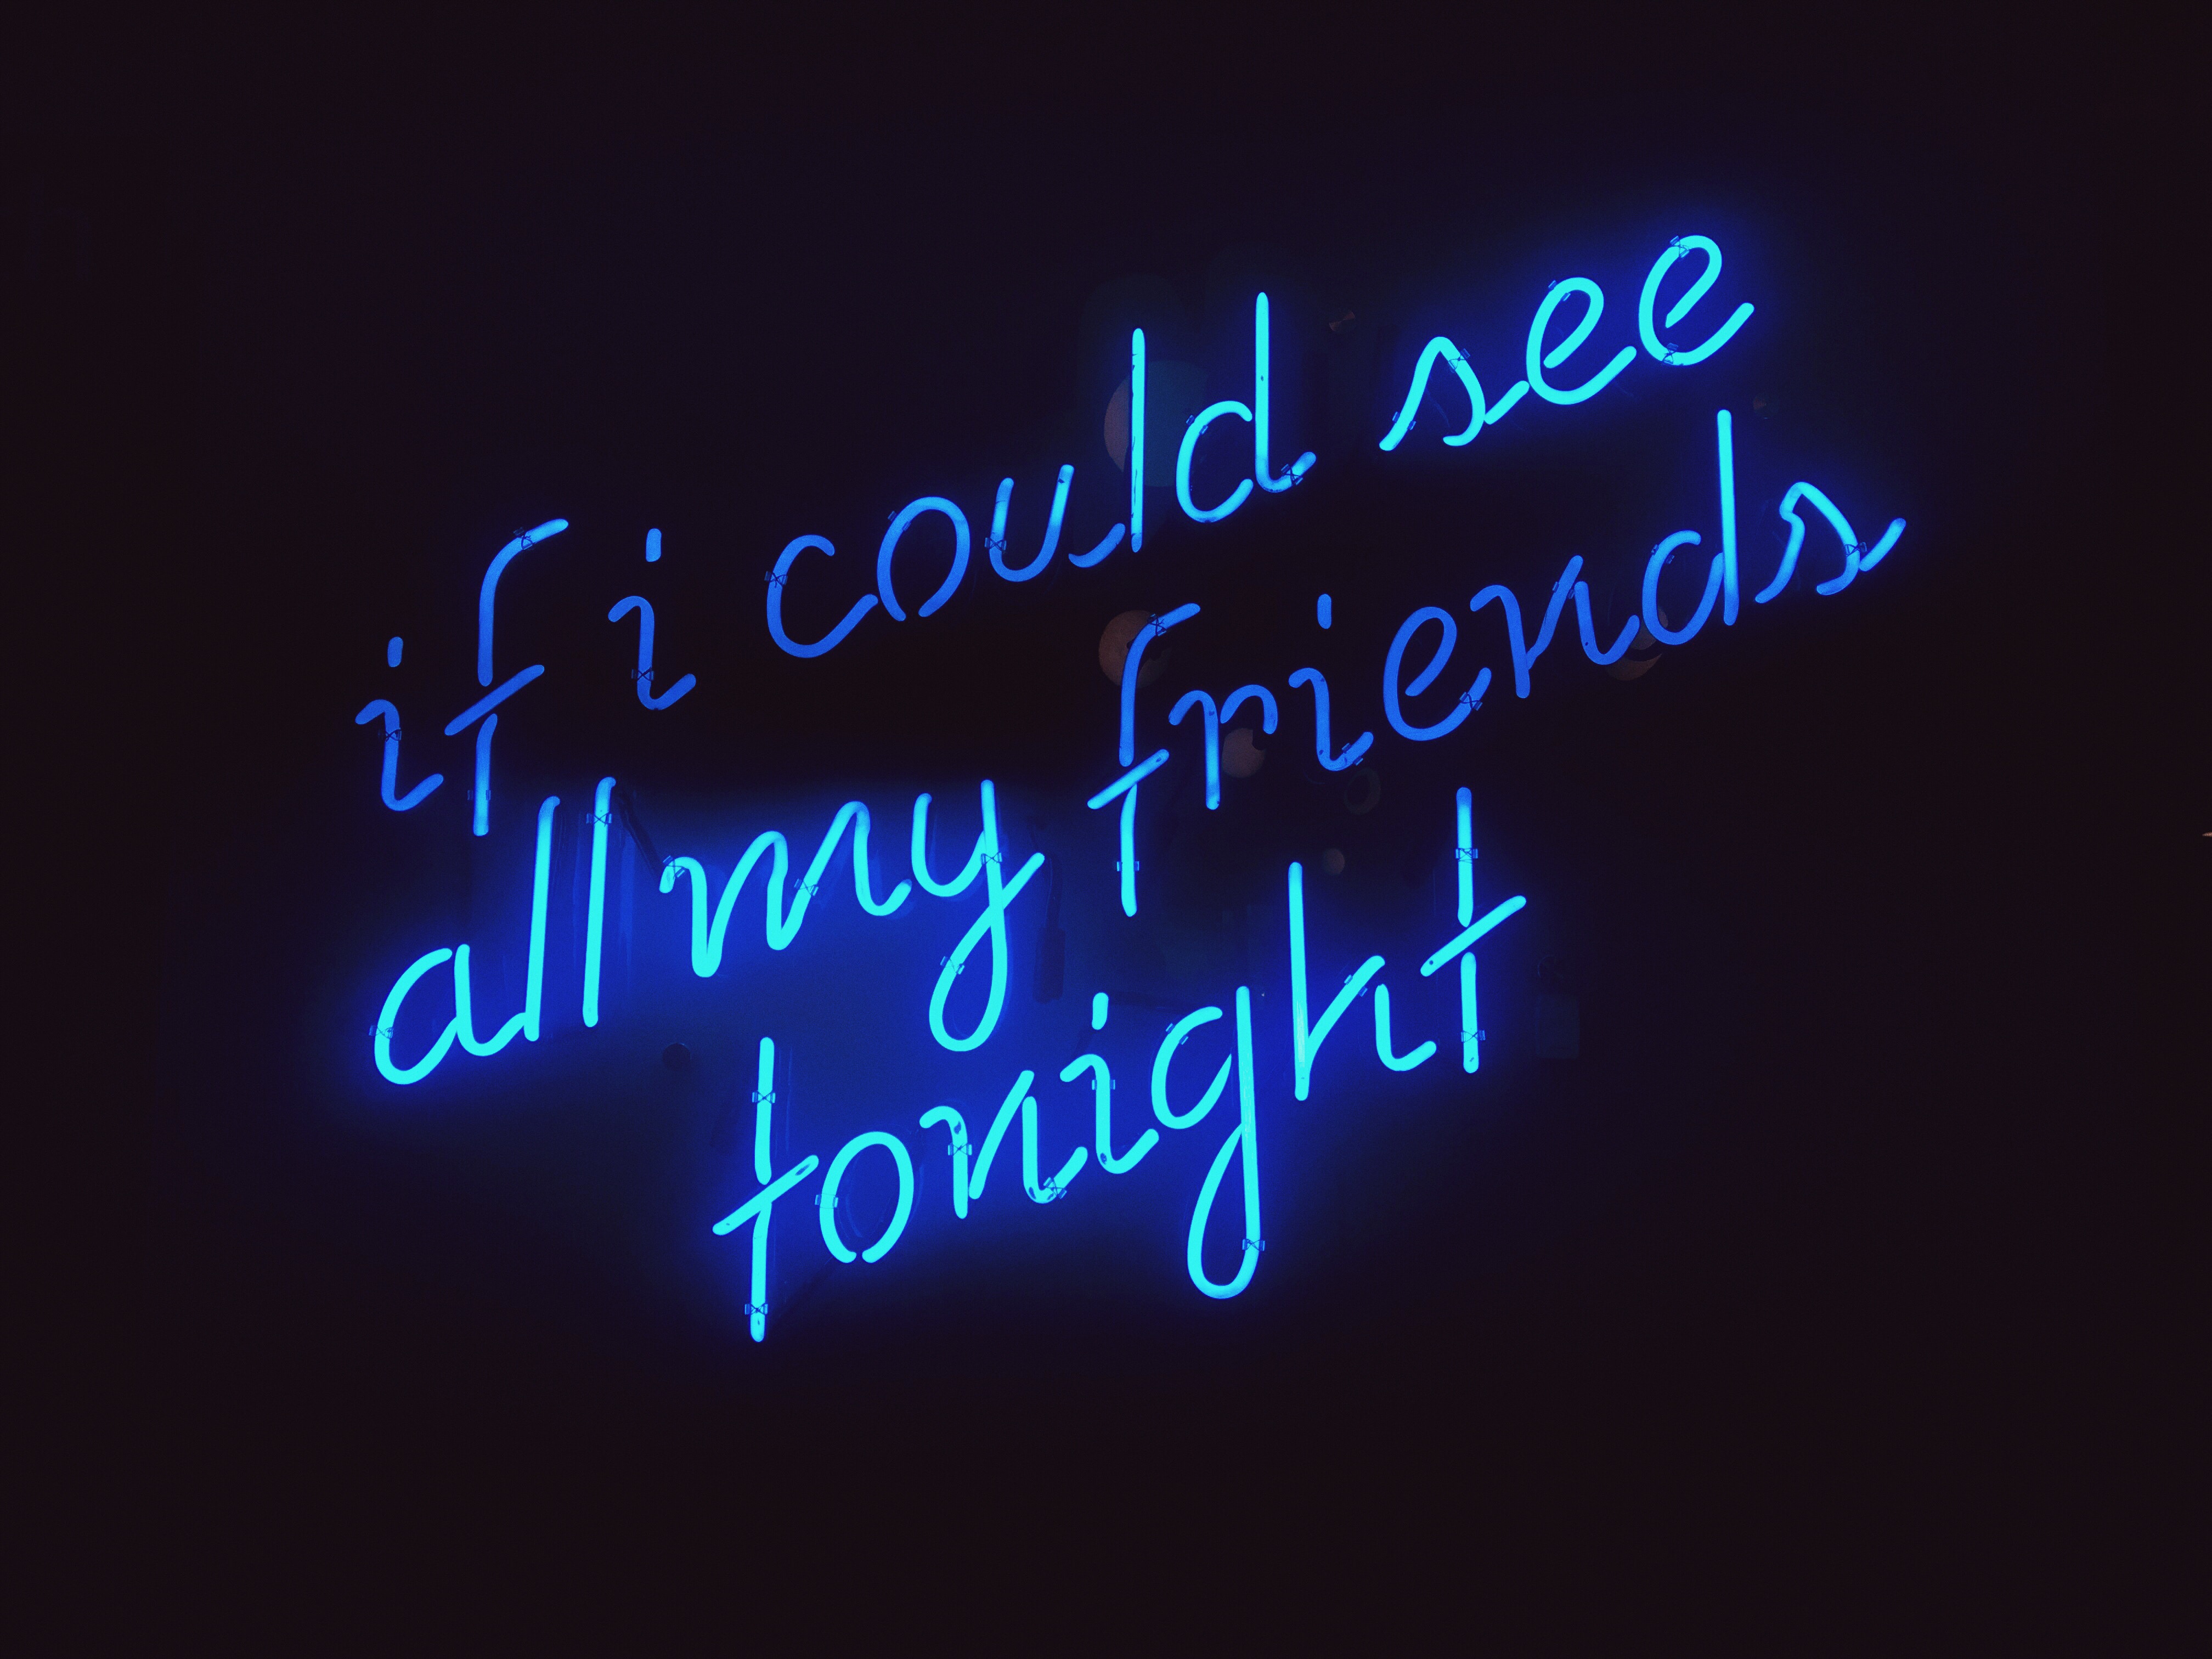 4032x3024 #quote, #letter, #friend, #creative, #wallpaper, #design, #may, #background, #typography, #inspirational, #dark, #black, #light, #fun, #Creative Commons image, #fancy, #blue, #words, #desktop, #neon, #sign HD Wallpaper